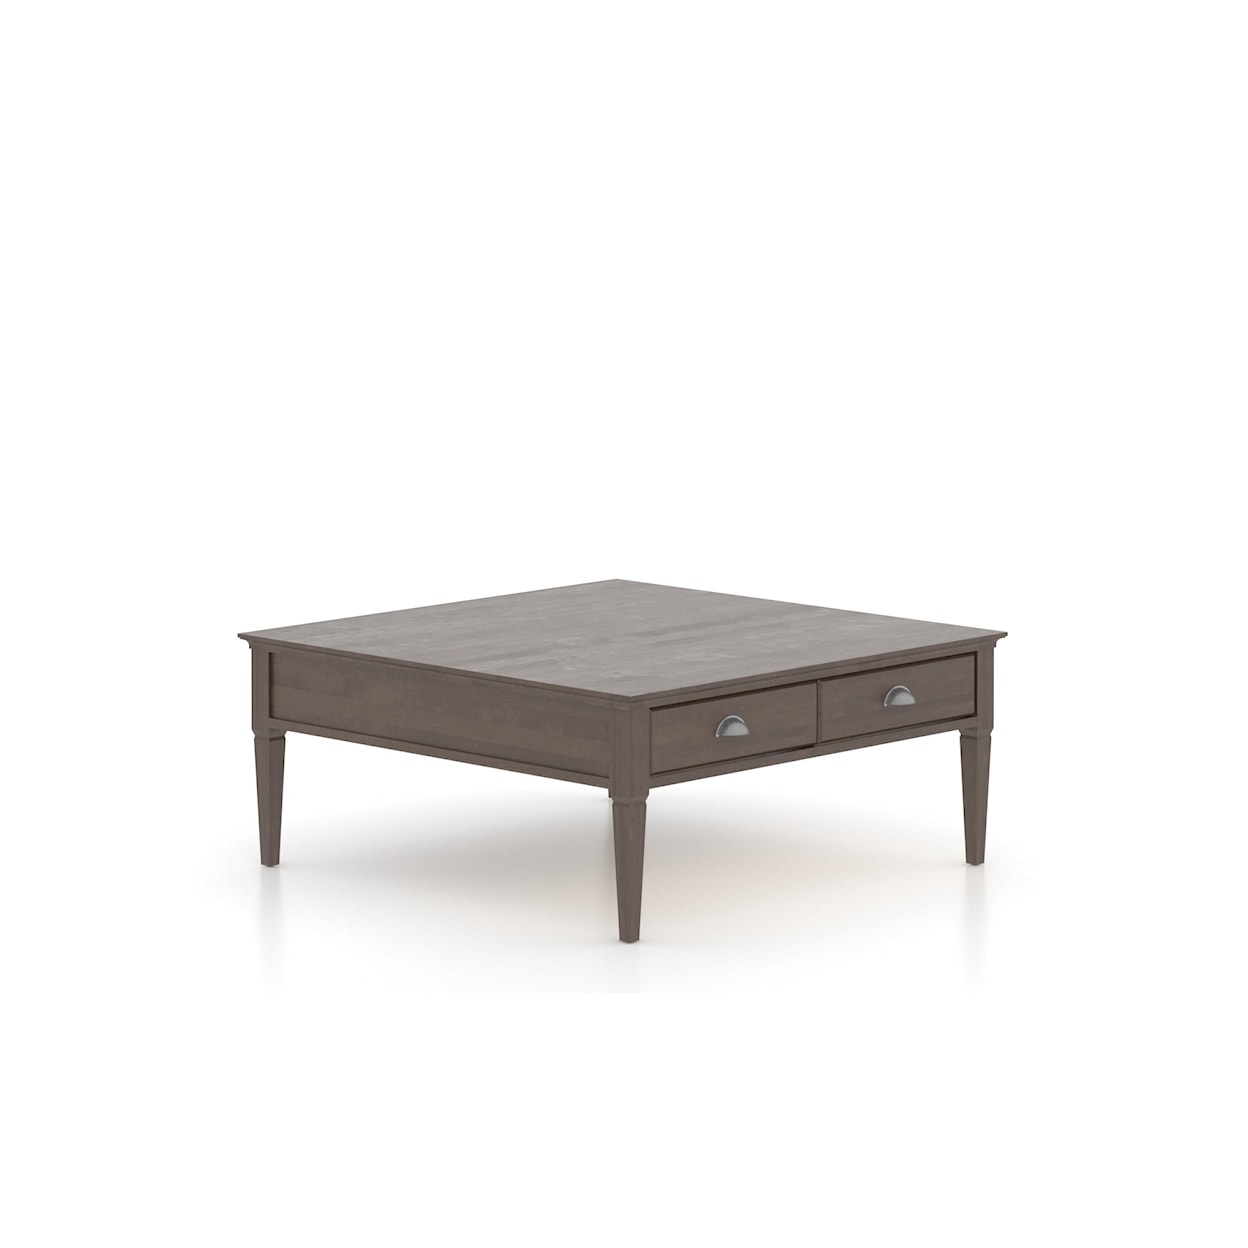 Canadel Accent Littoral Square Coffee Table